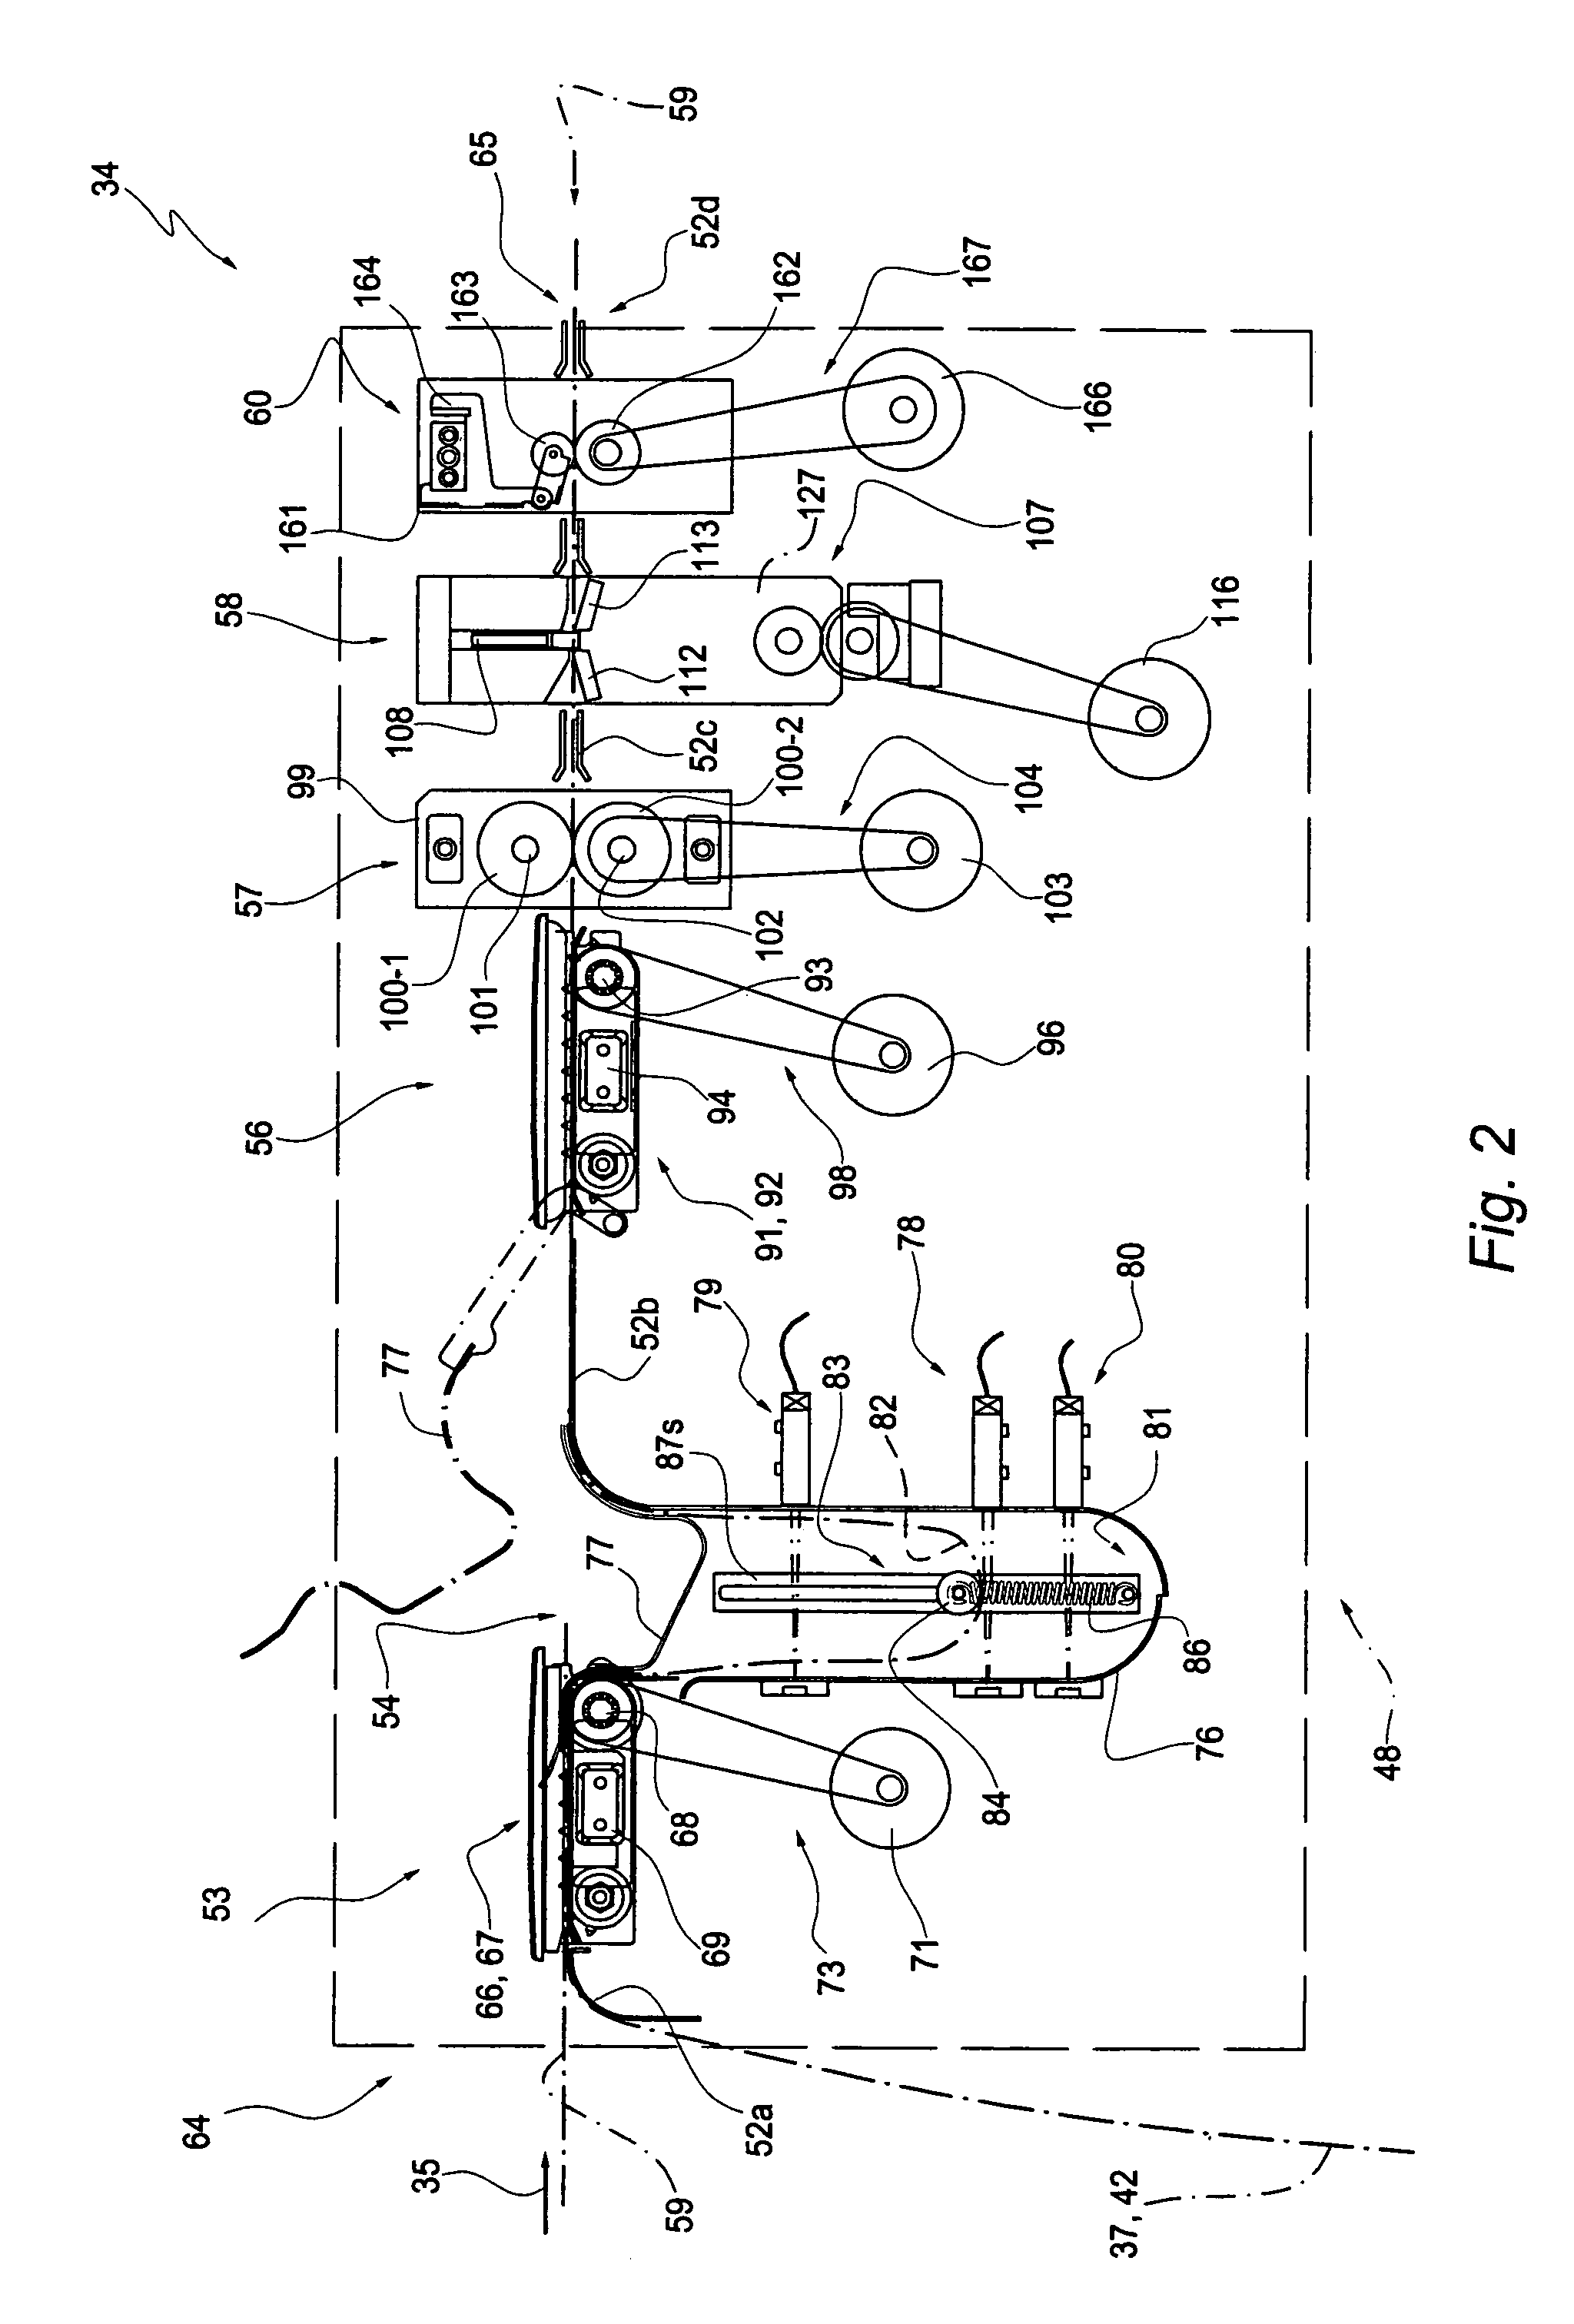 Cutting equipment for continuous form